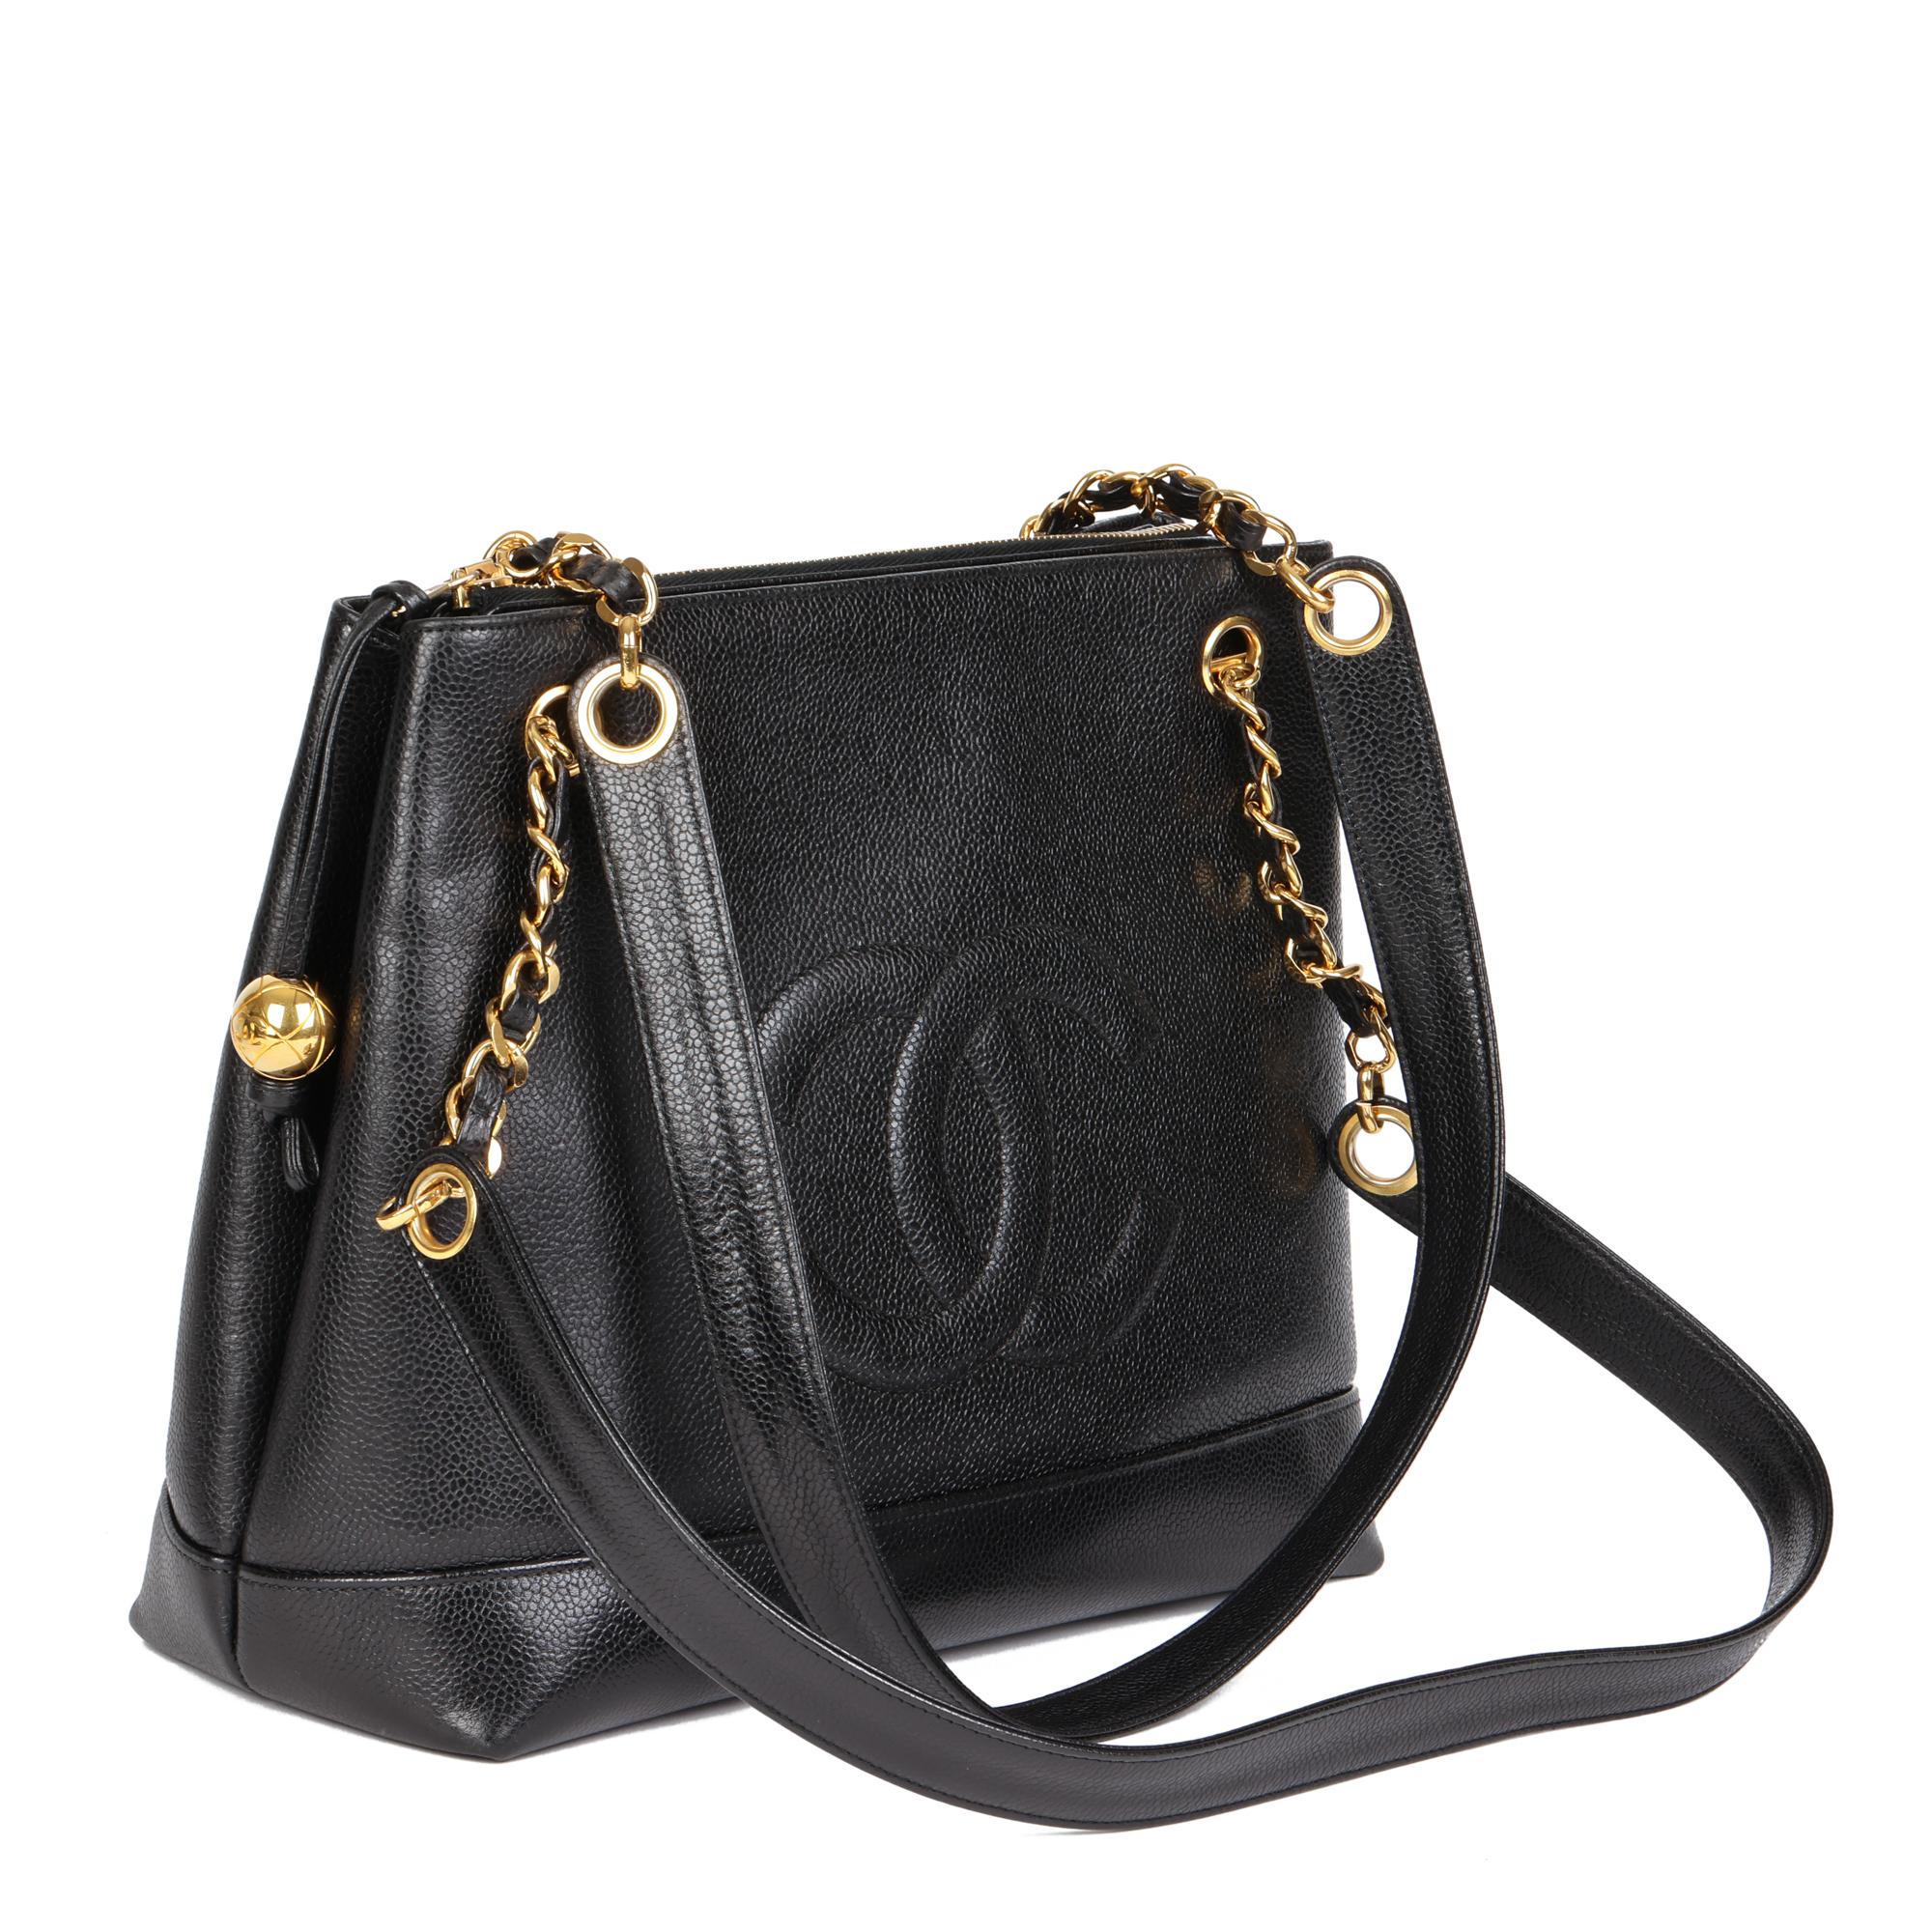 CHANEL
Black Caviar Leather Vintage Timeless Shoulder Tote

Xupes Reference: HB4542
Serial Number: 2447137
Age (Circa): 1991
Accompanied By: Authenticity Card
Authenticity Details: Authenticity Card, Serial Sticker (Made in Italy)
Gender: